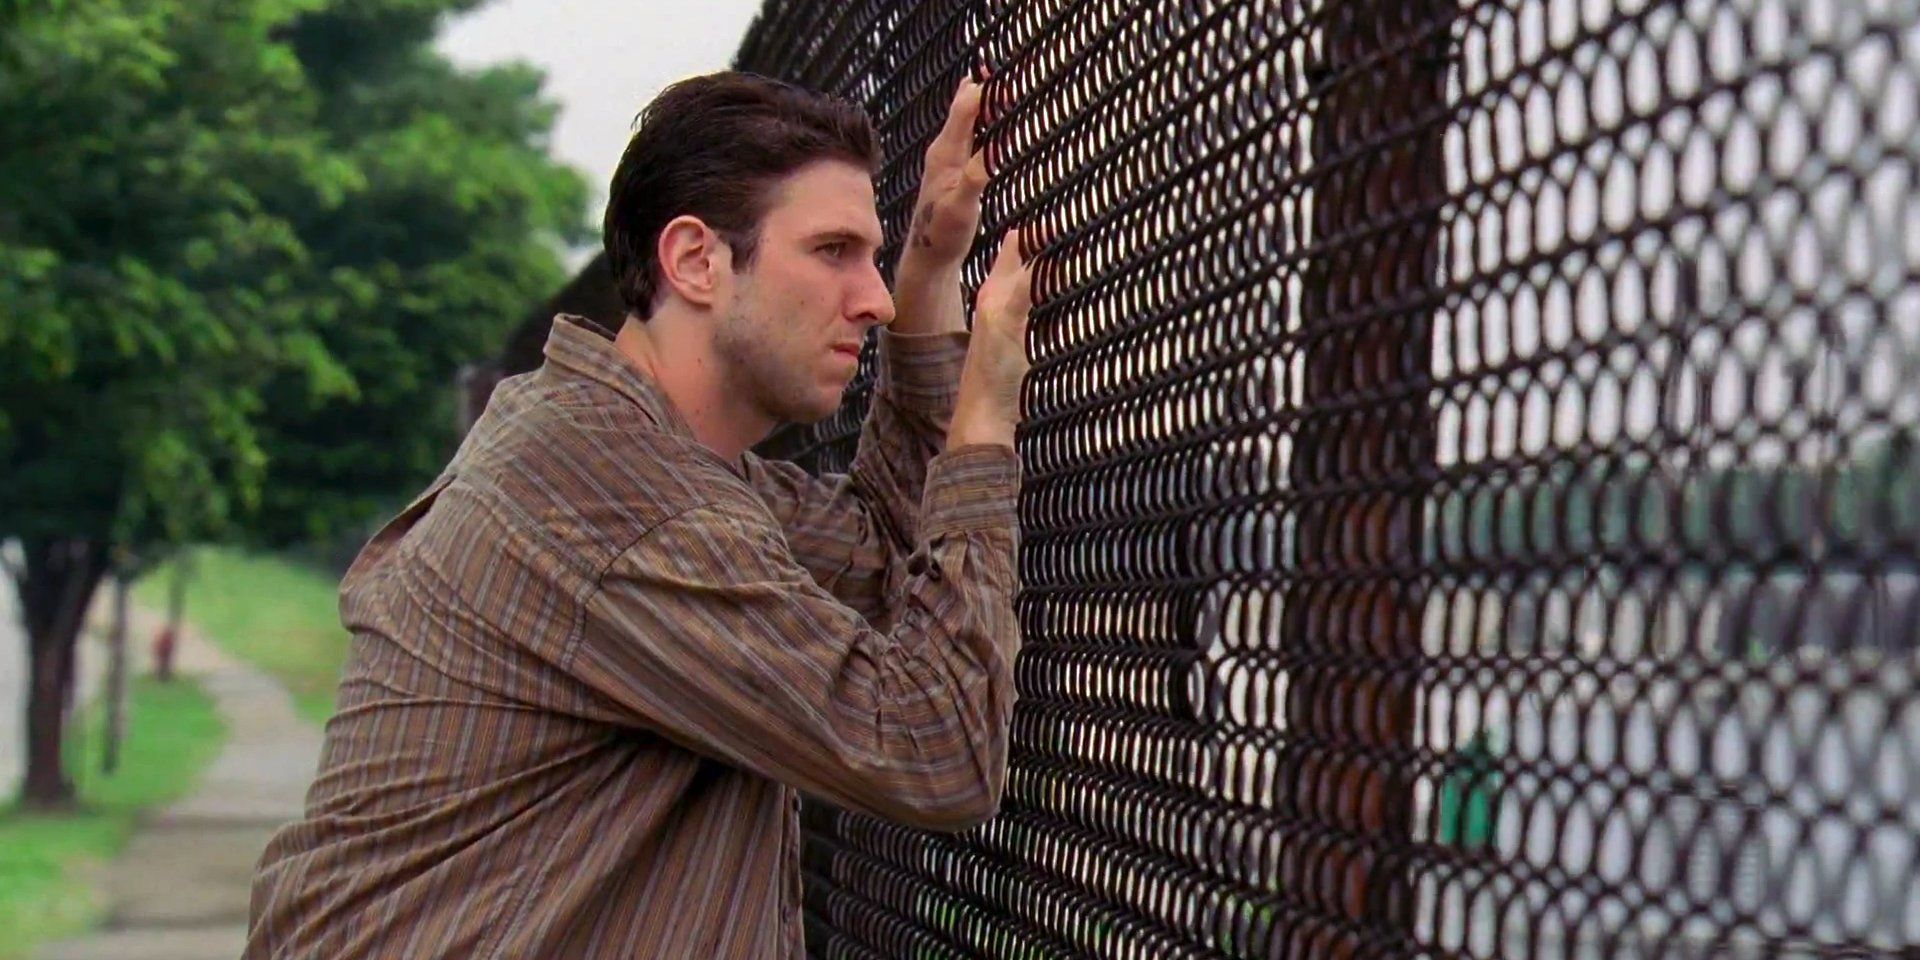 Nicky leaning on a fence in The Wire